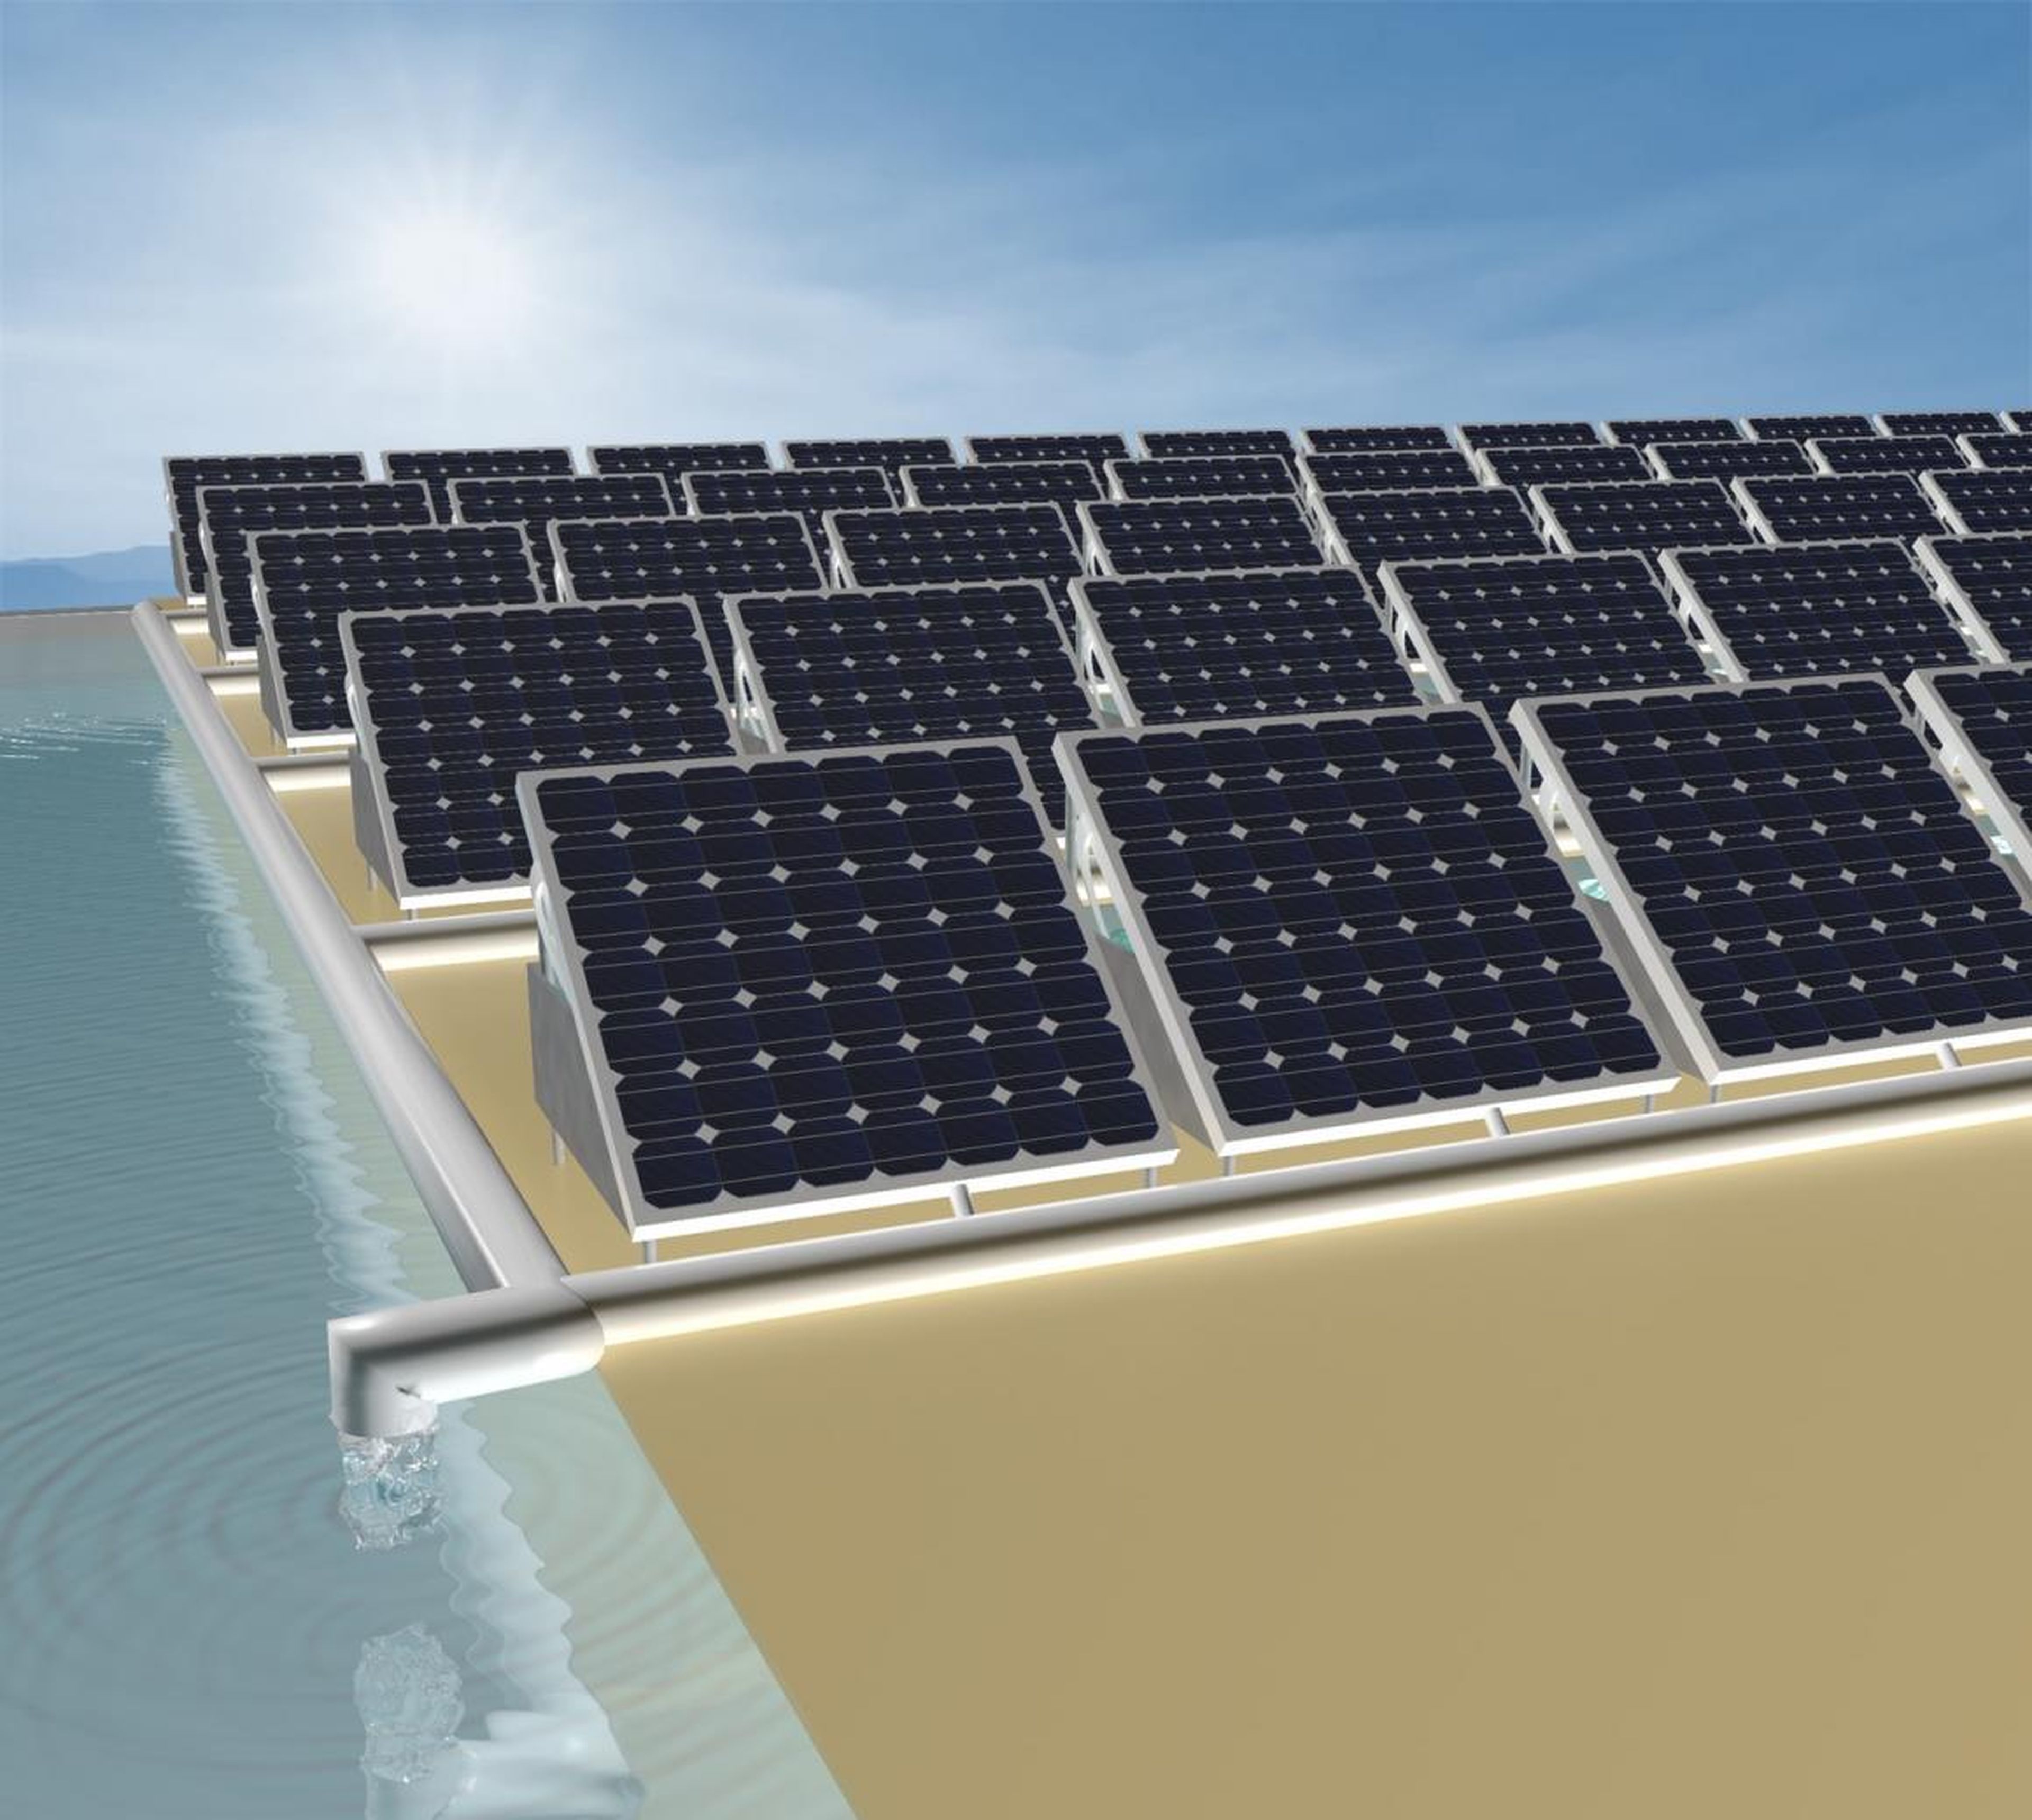 An illustration of solar panels that can produce both electricity and fresh water.